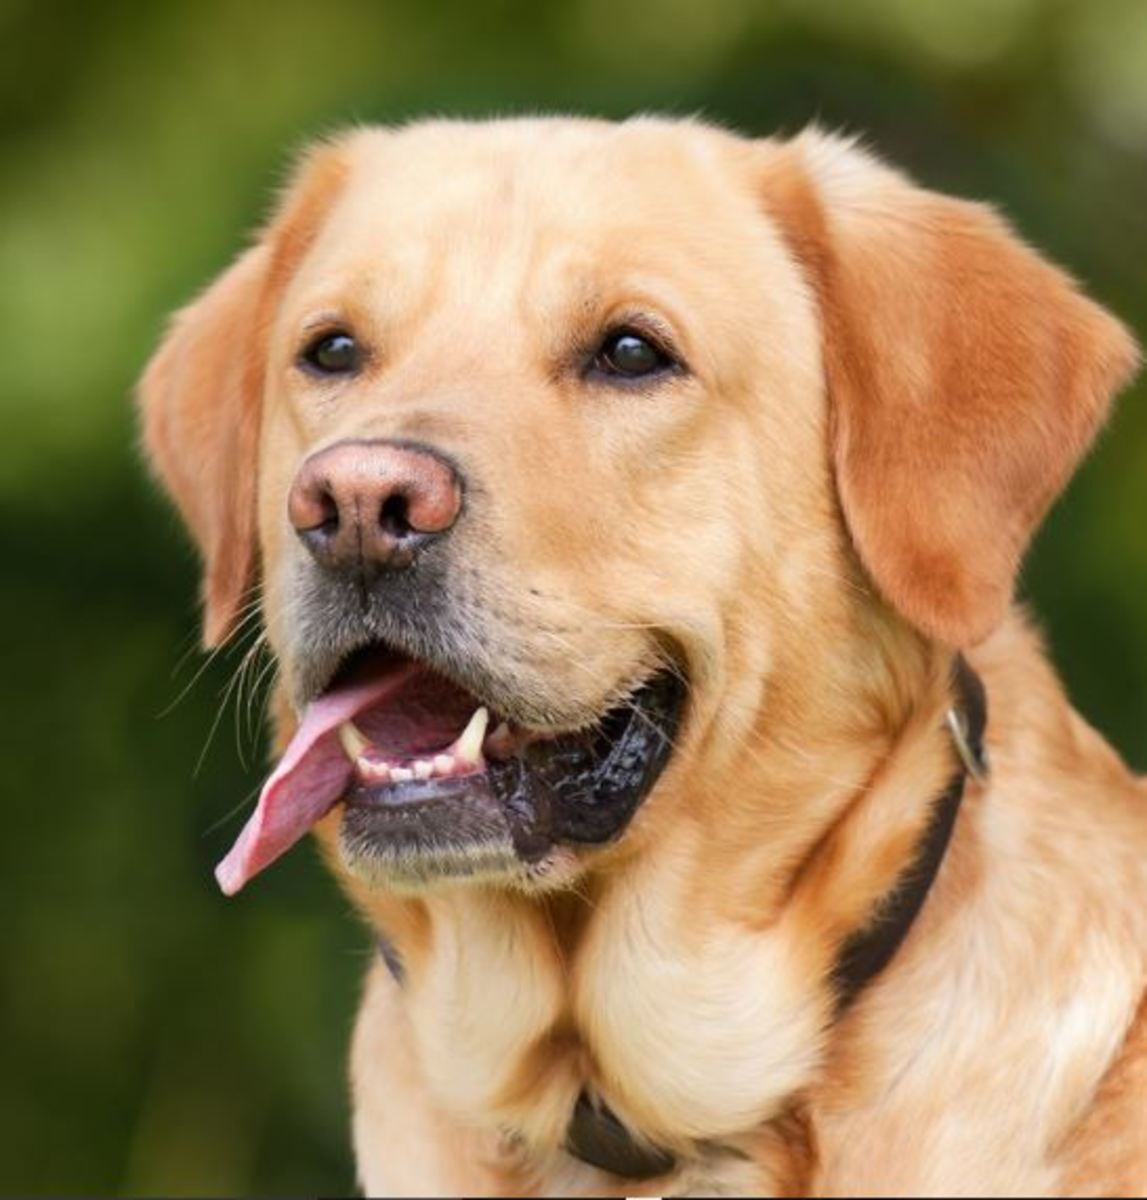  Spleen tumors are common in large dogs, particularly Goldens and German shepherds.